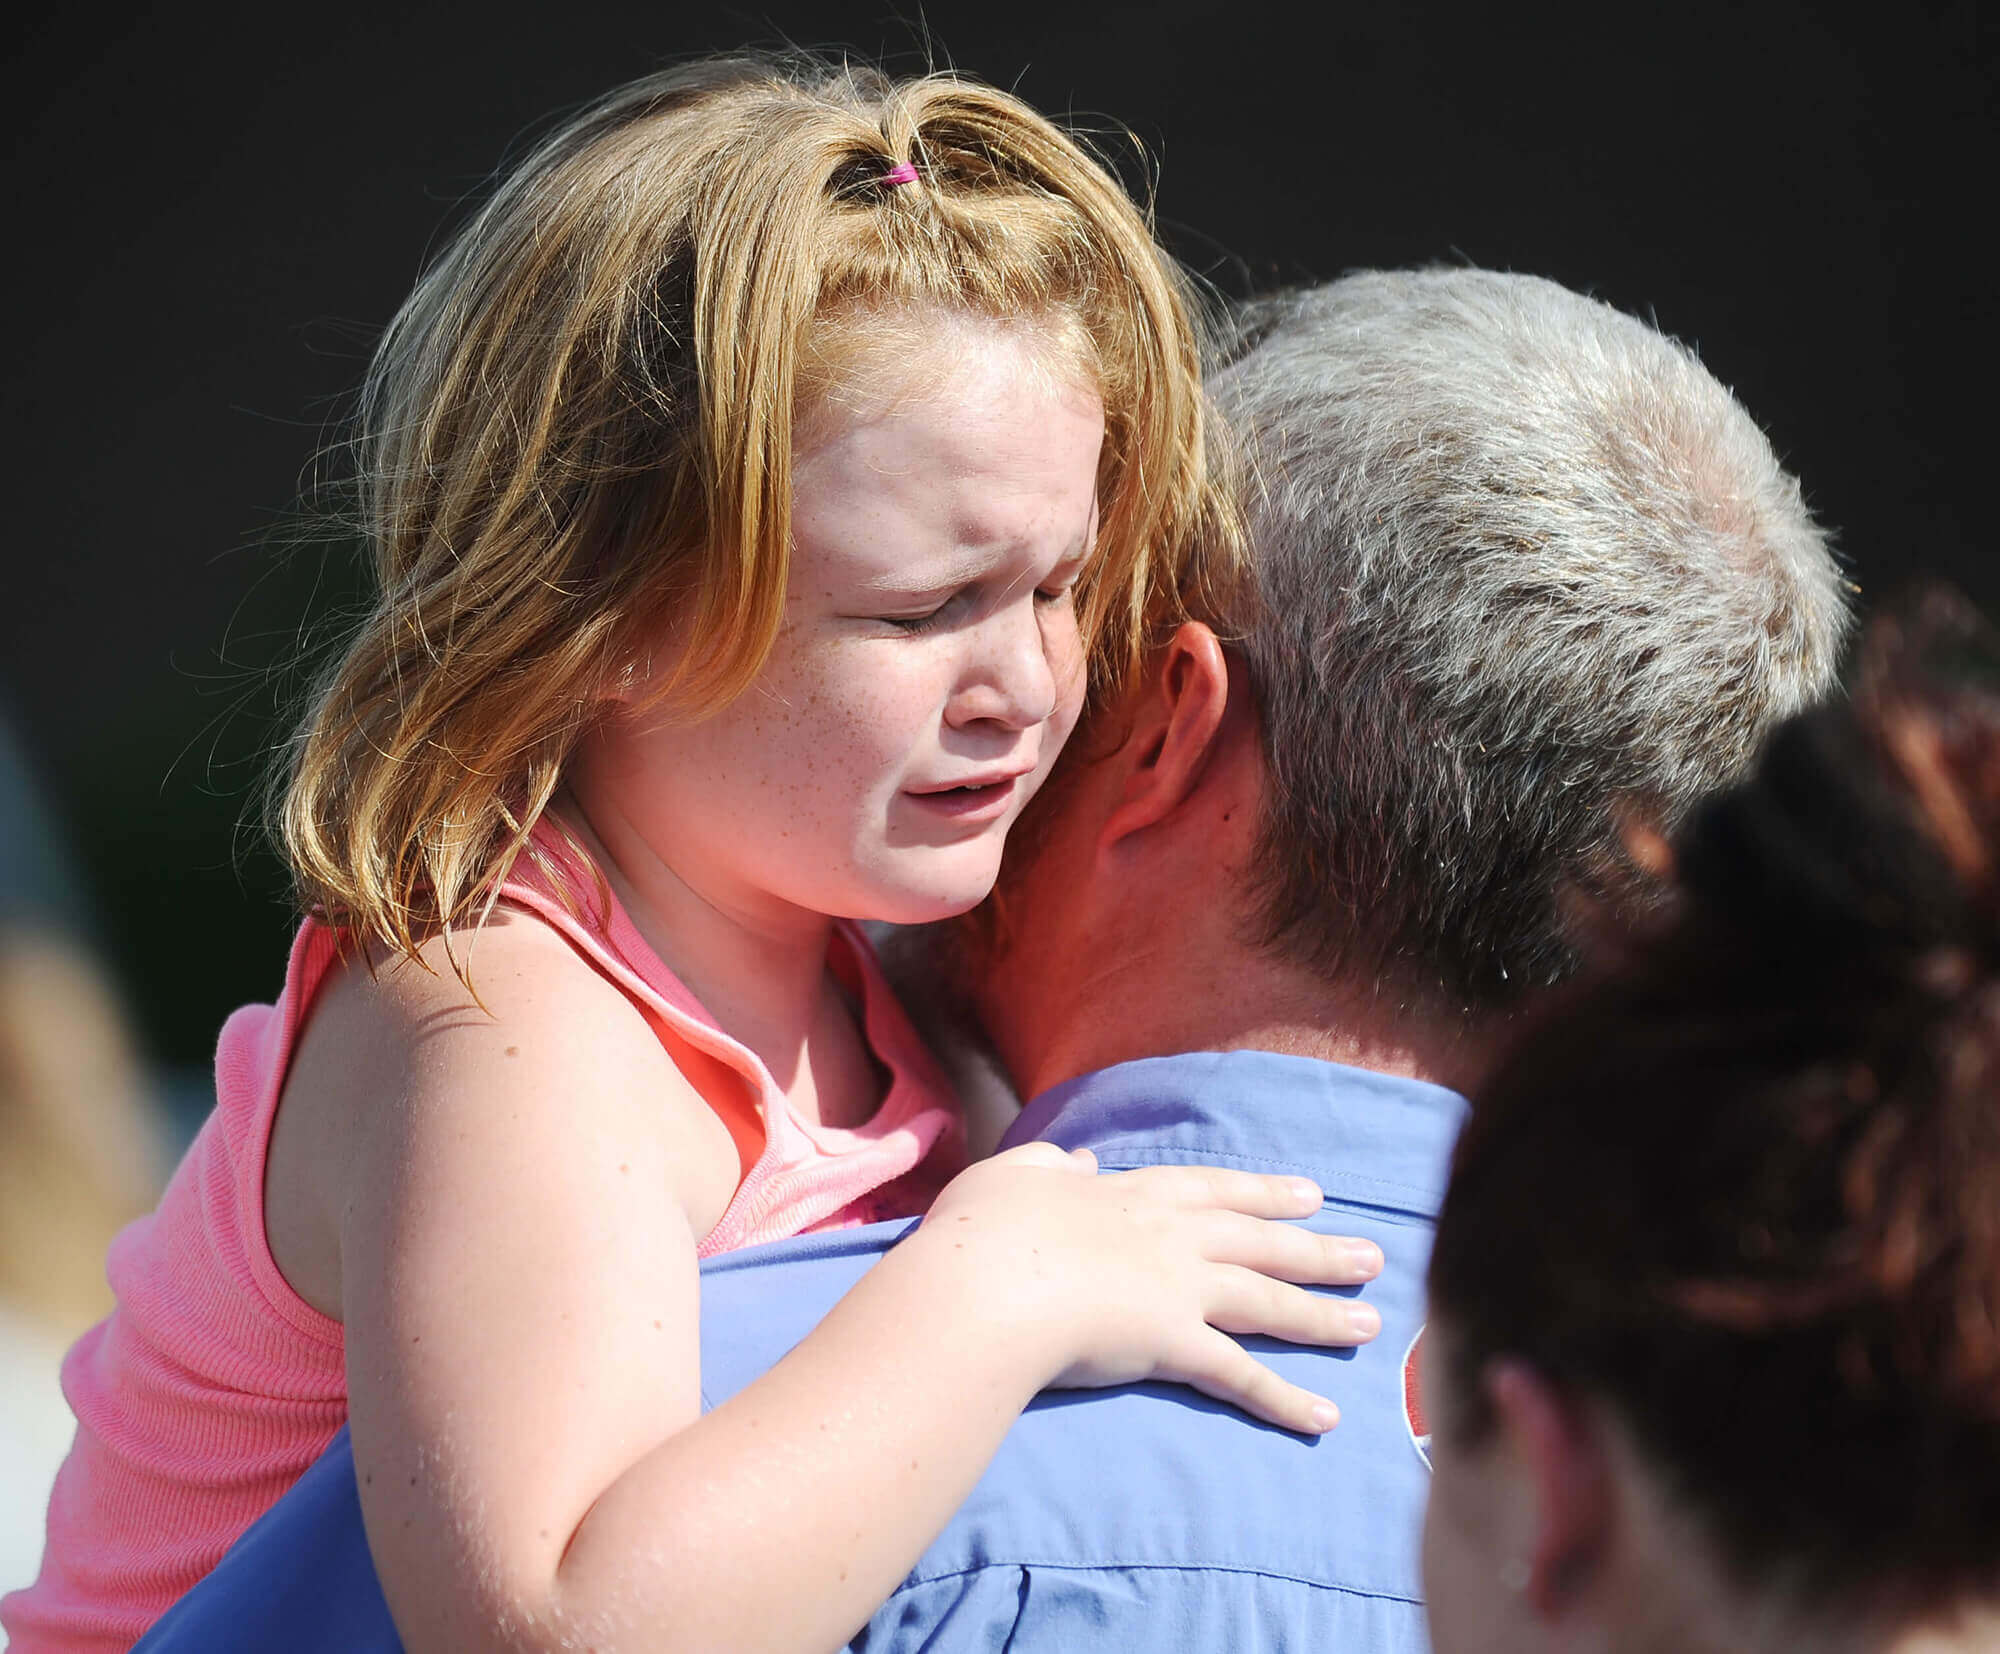 Image of child being reunited with father after school shooting